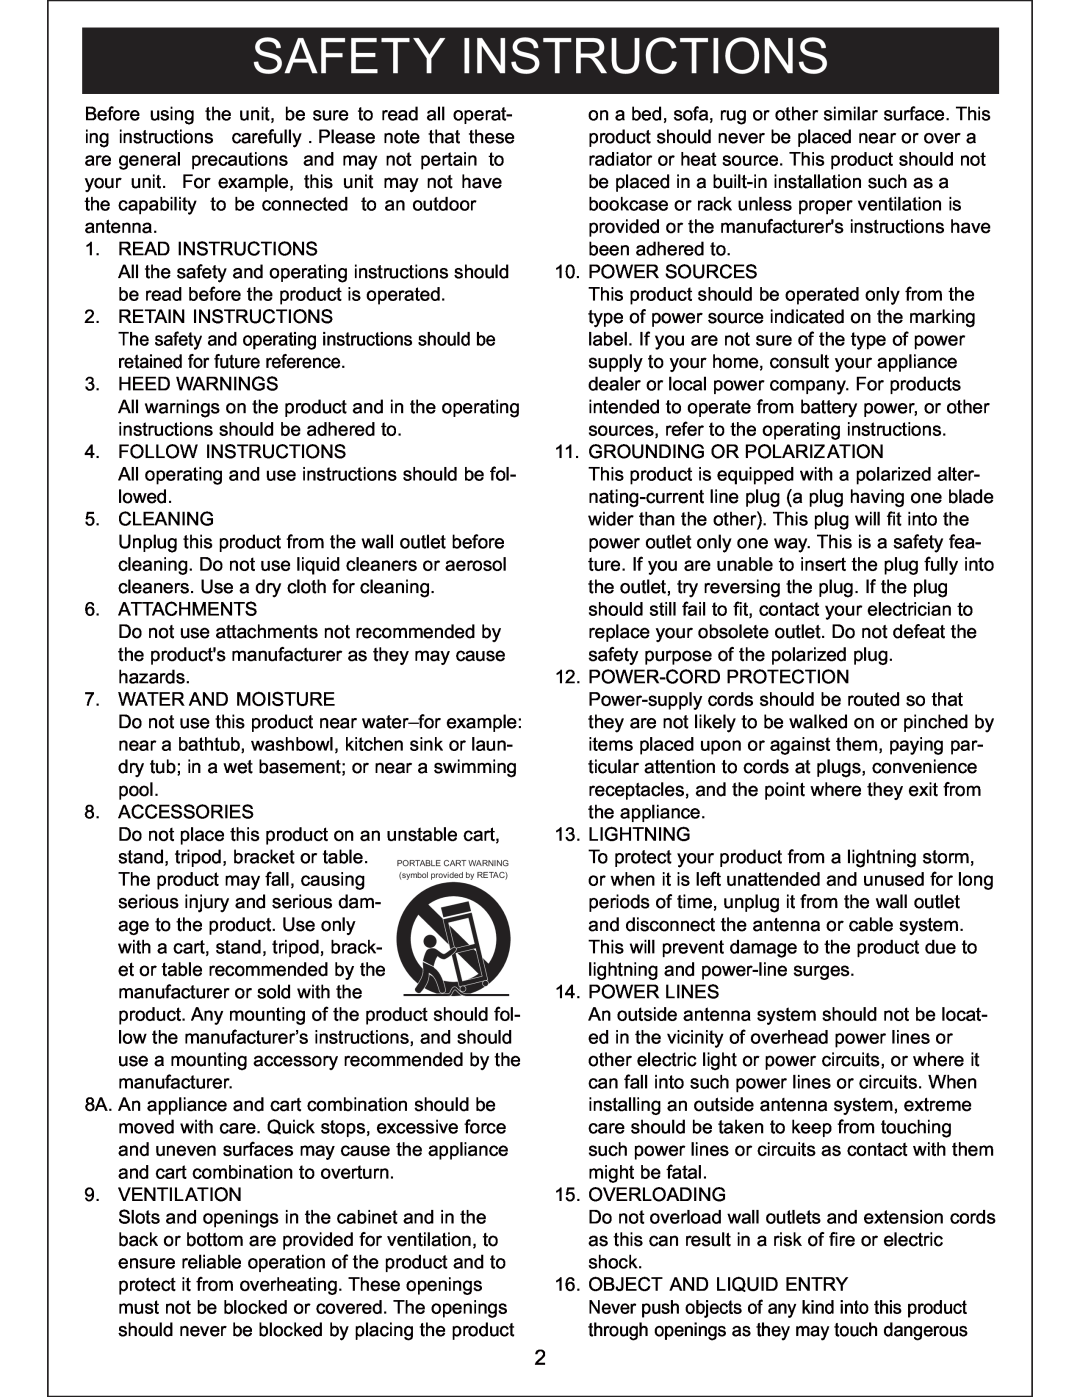 Sylvania SIP3019 instruction manual Safety Instructions, Read Instructions 